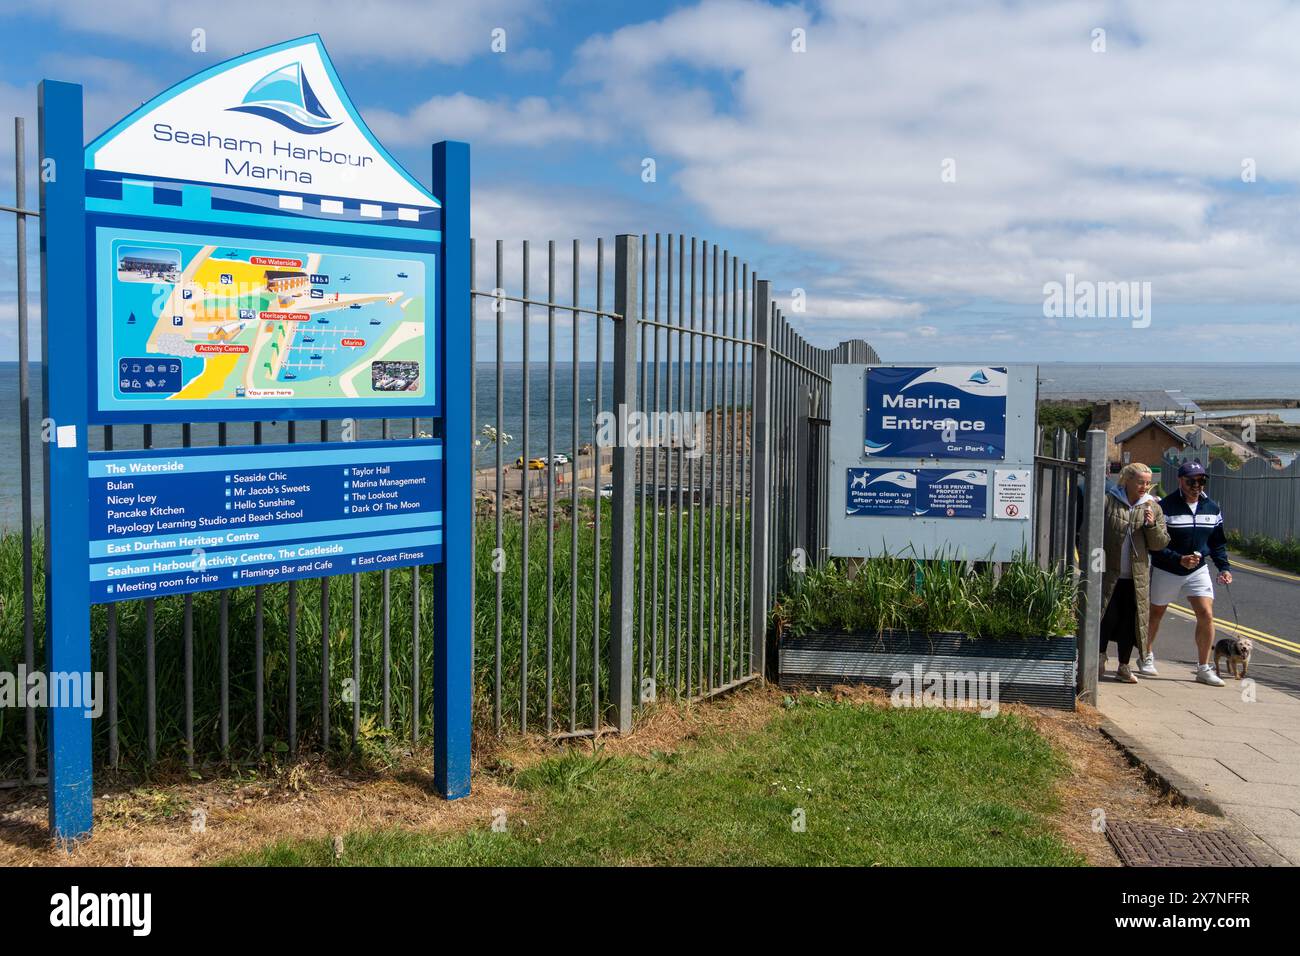 Seaham, County Durham, UK.Sign at the entrance to Seaham Harbour Marina. Stock Photo